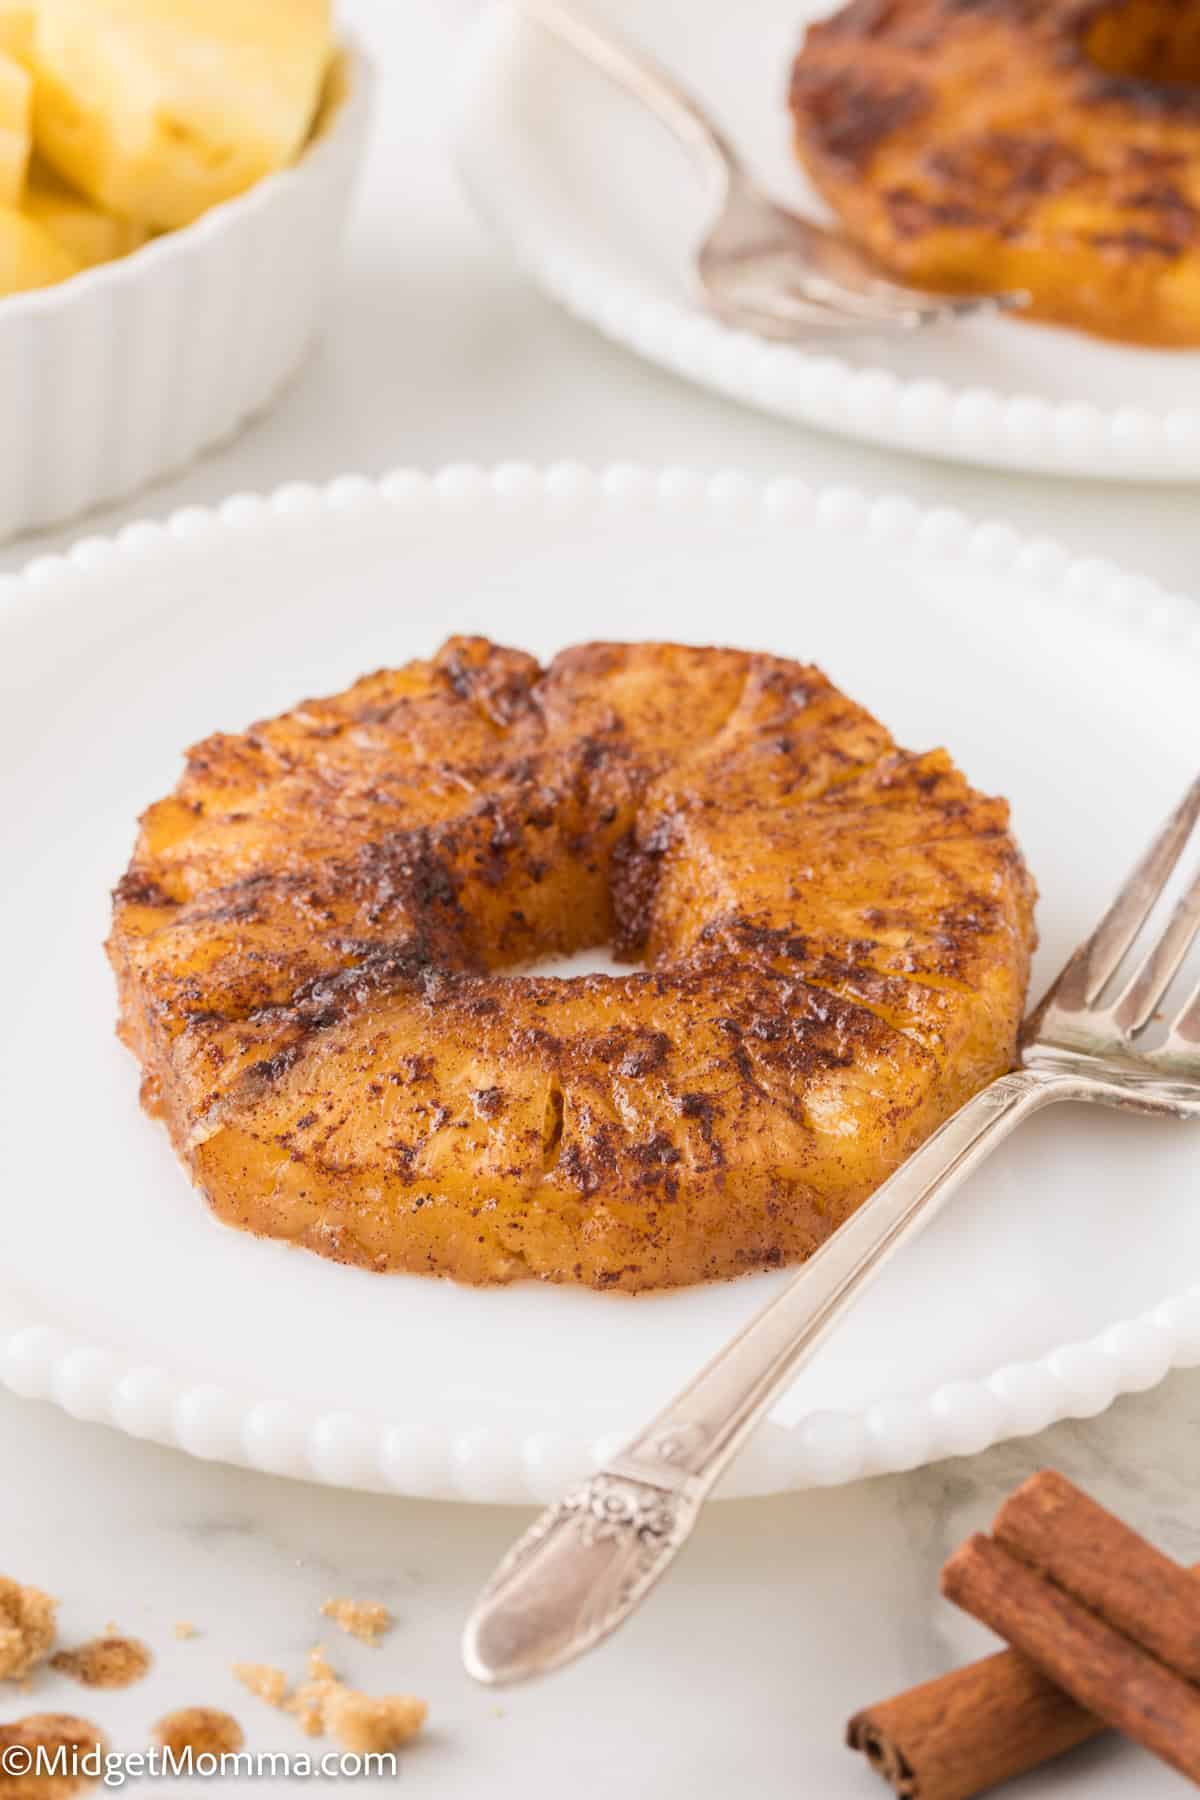 A single baked pineapple ring sprinkled with cinnamon on a white plate, accompanied by a fork and cinnamon sticks.